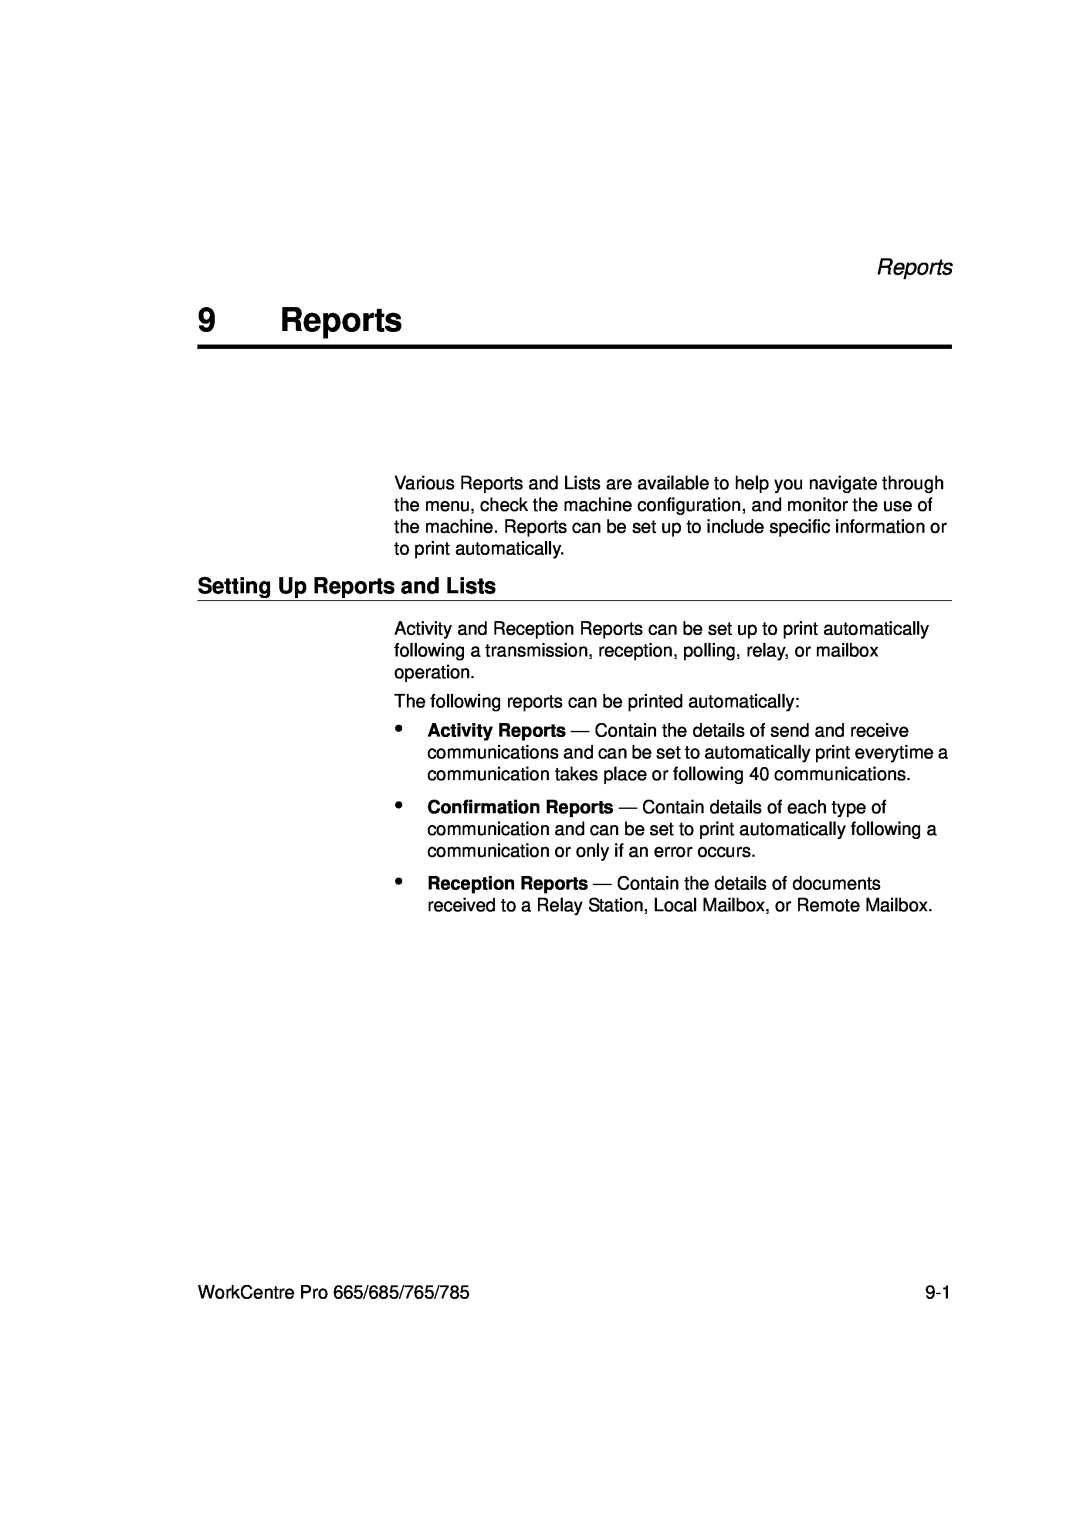 Xerox 785, 765, 665, 685 manual Setting Up Reports and Lists 